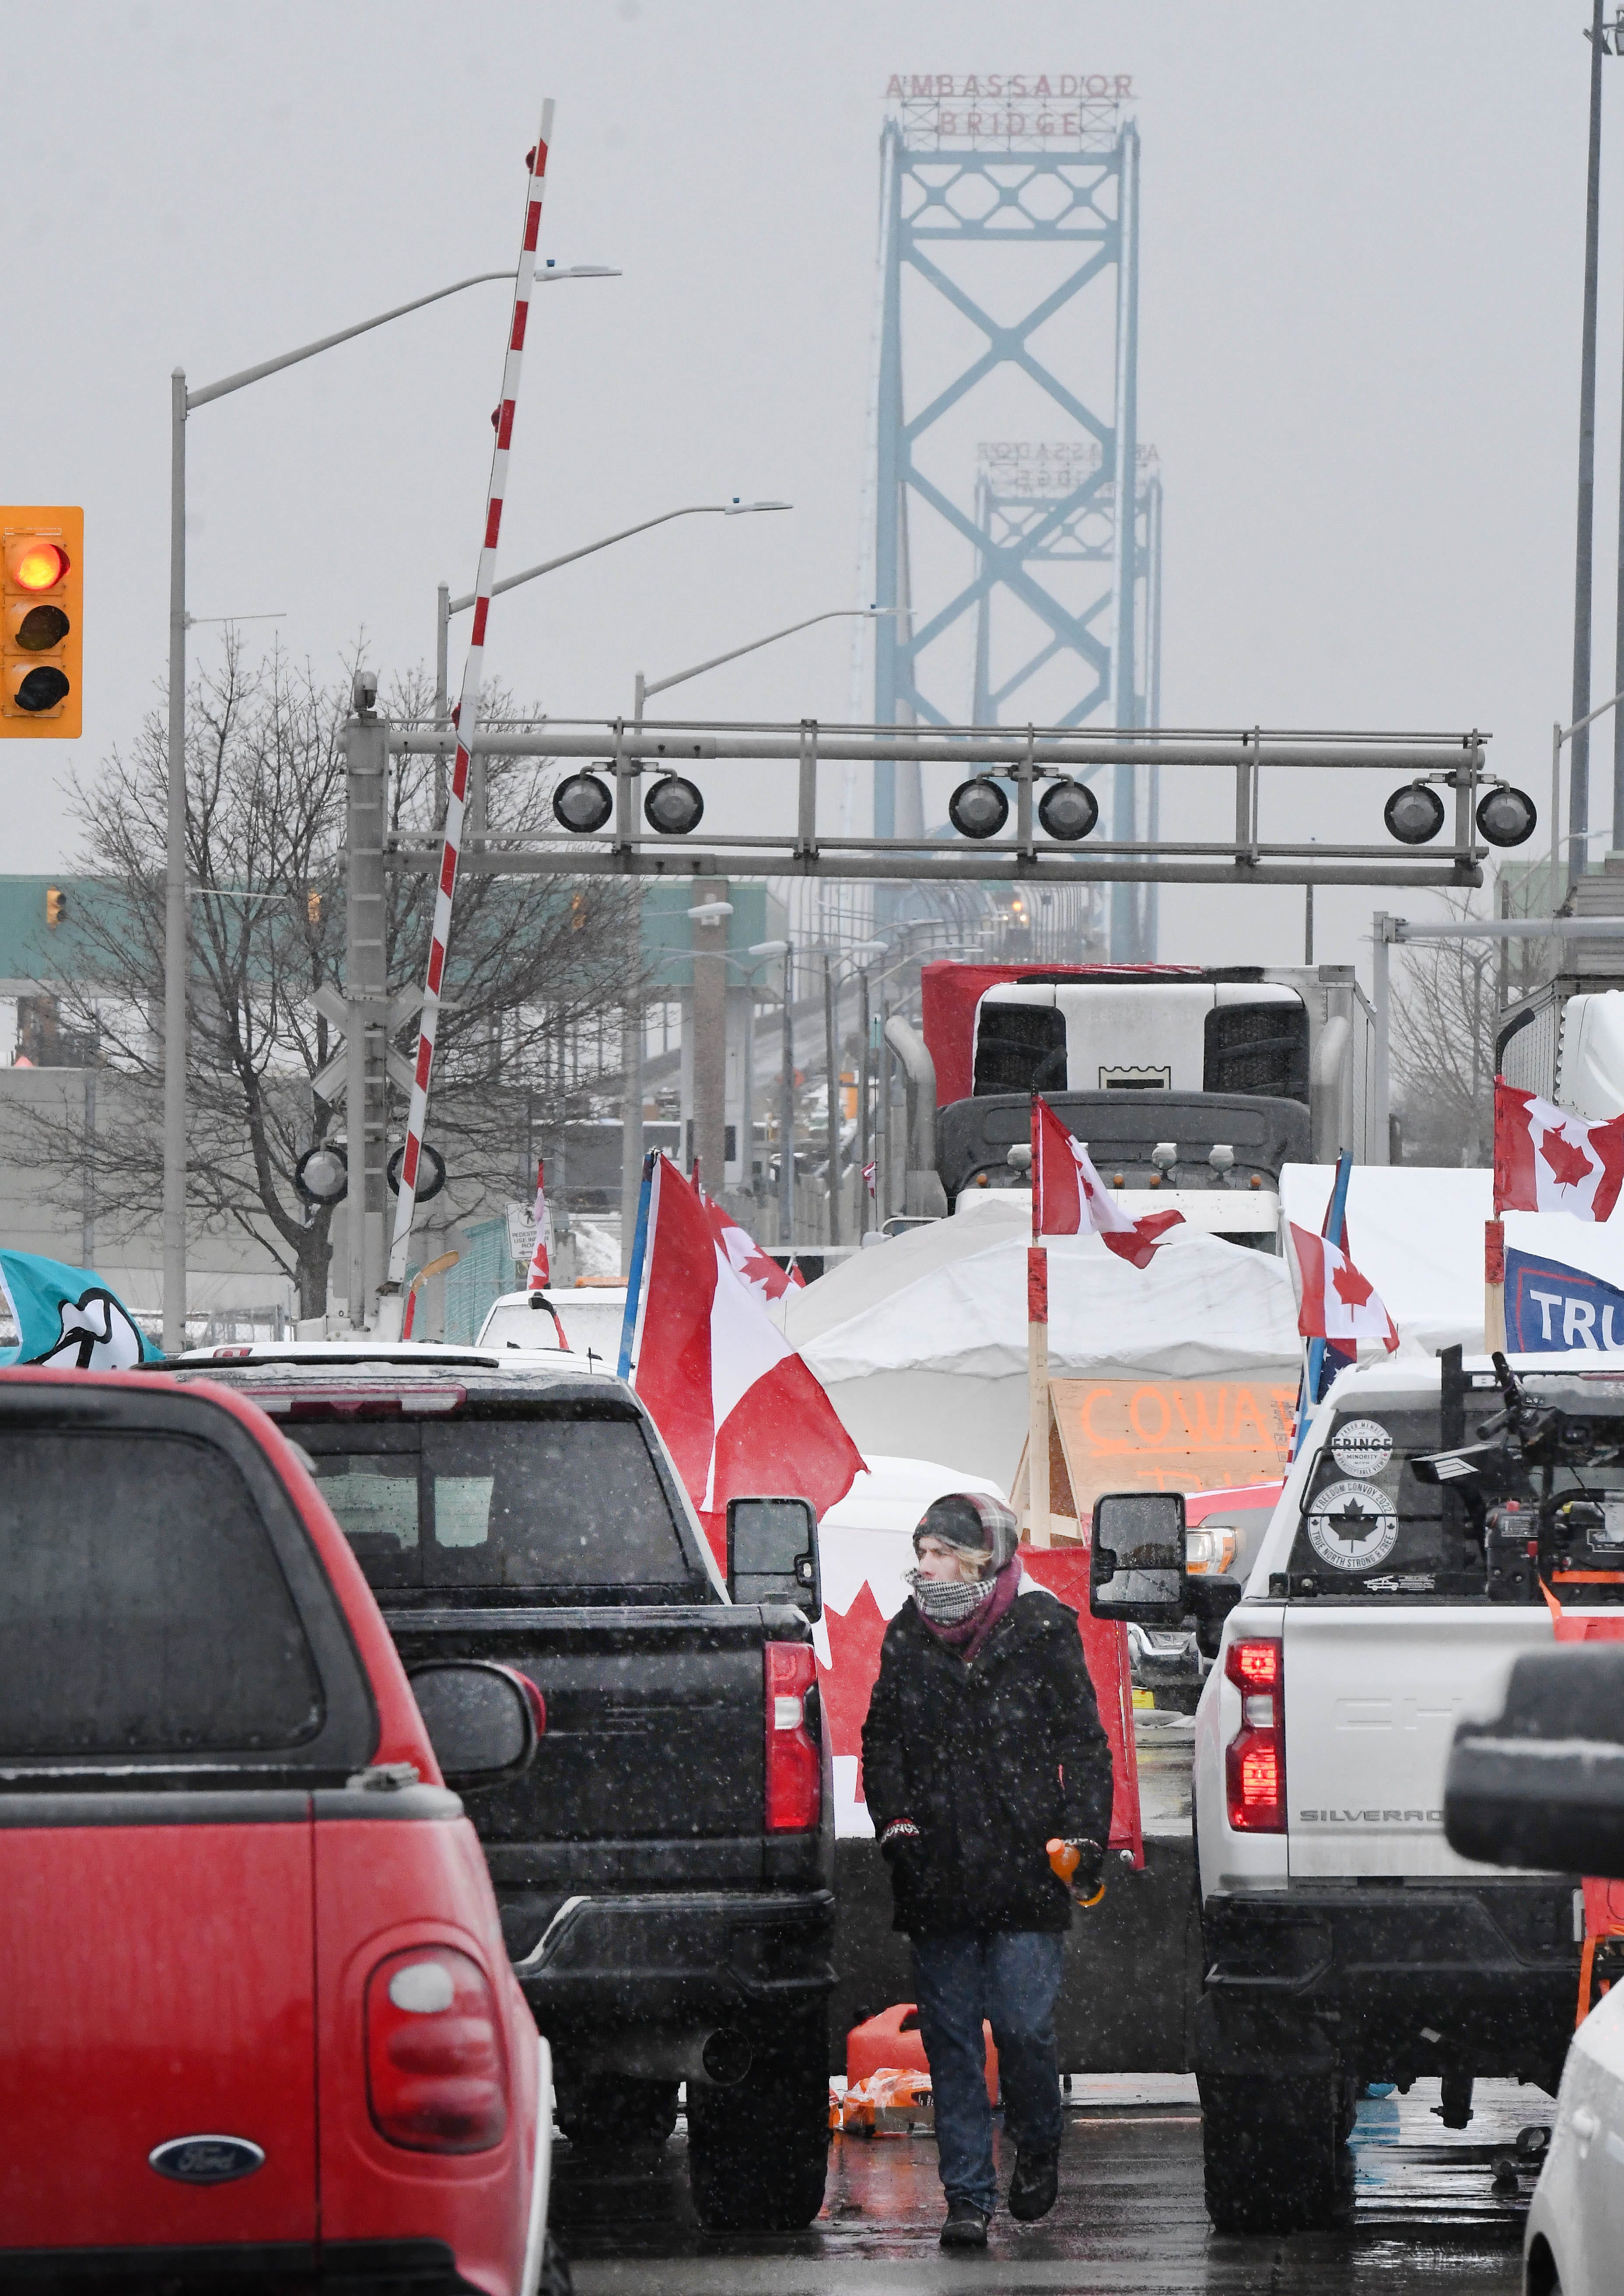 Canadian truckers protests against COVID measures on corner of Huron Church Road and Tecumseh, with the Ambassador Bridge in the background, in Windsor, Canada on February 11, 2022.